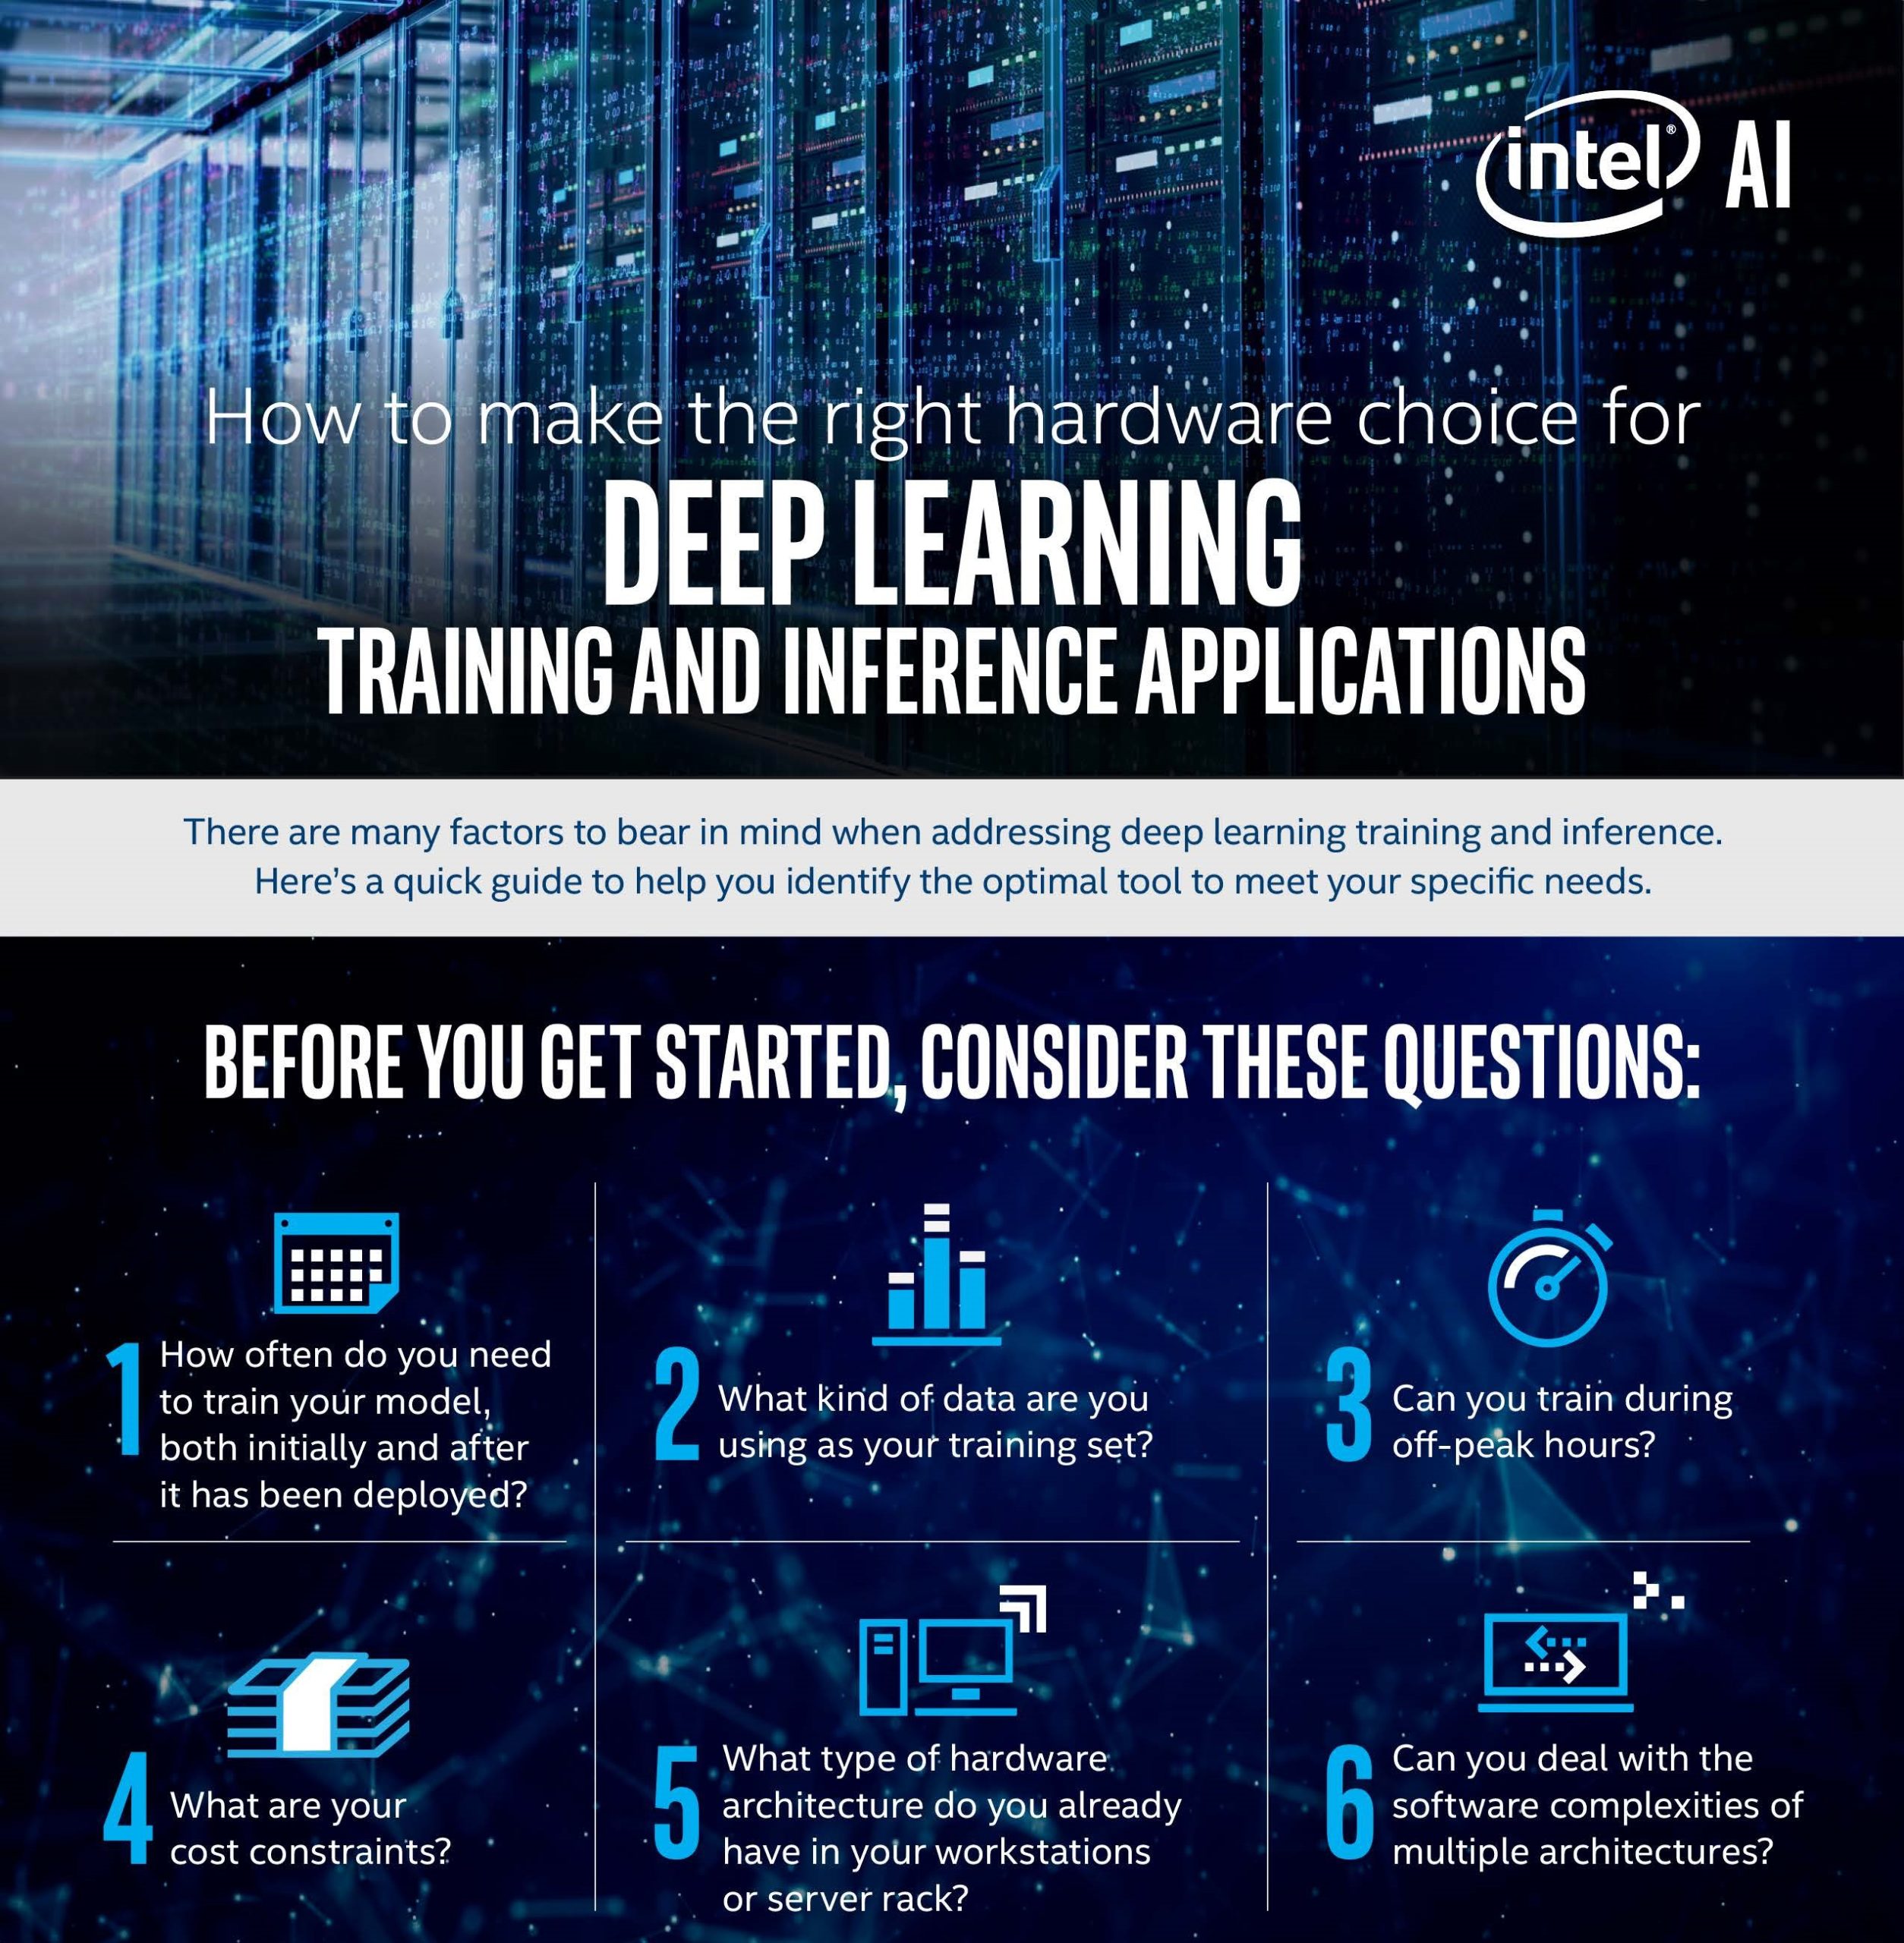 How to make the right hardware choice for deep learning training and inference applications